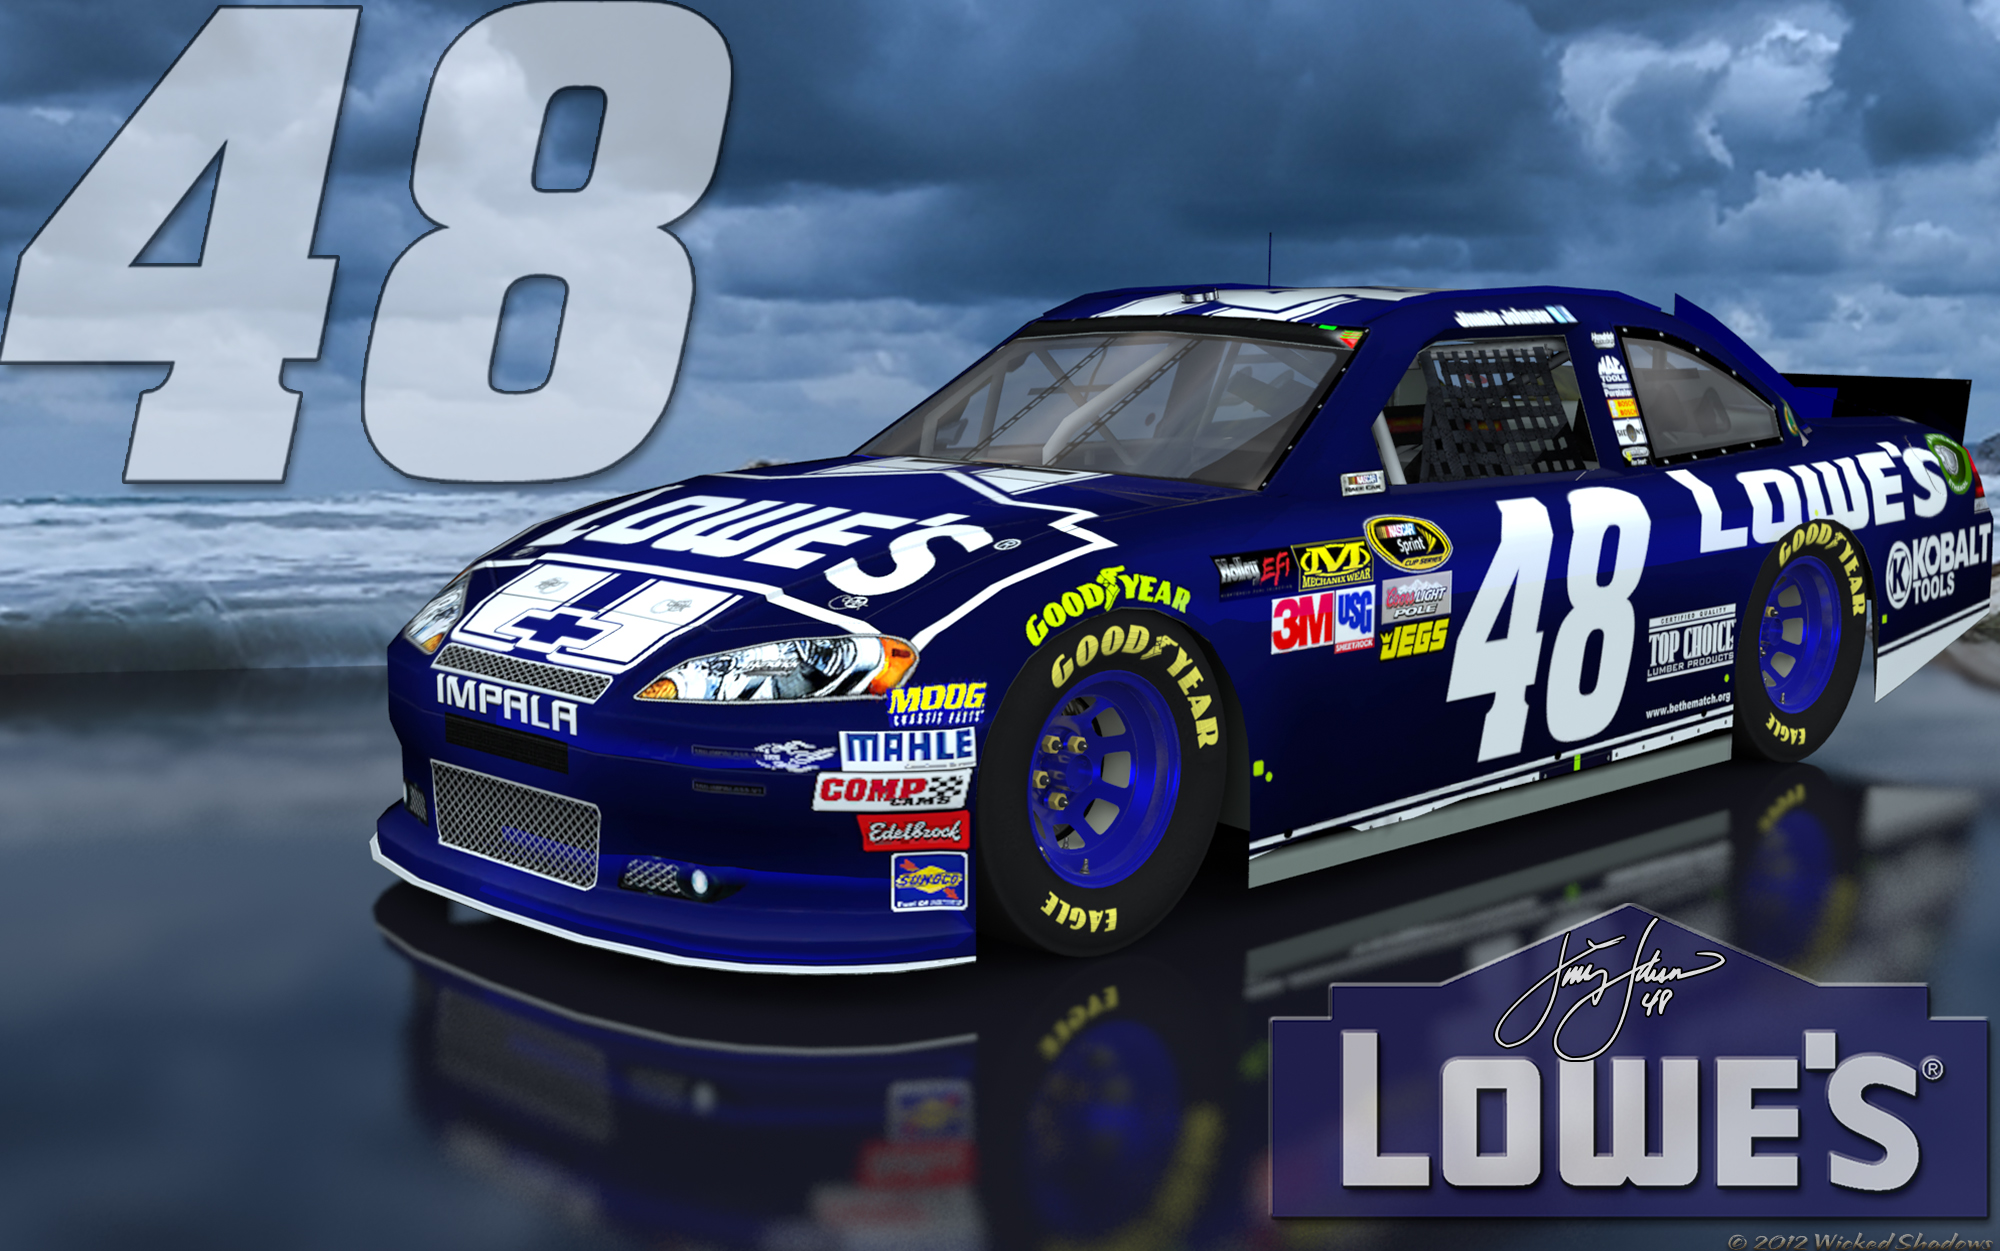 Jimmie Johnson Wall Paper Wallpapers